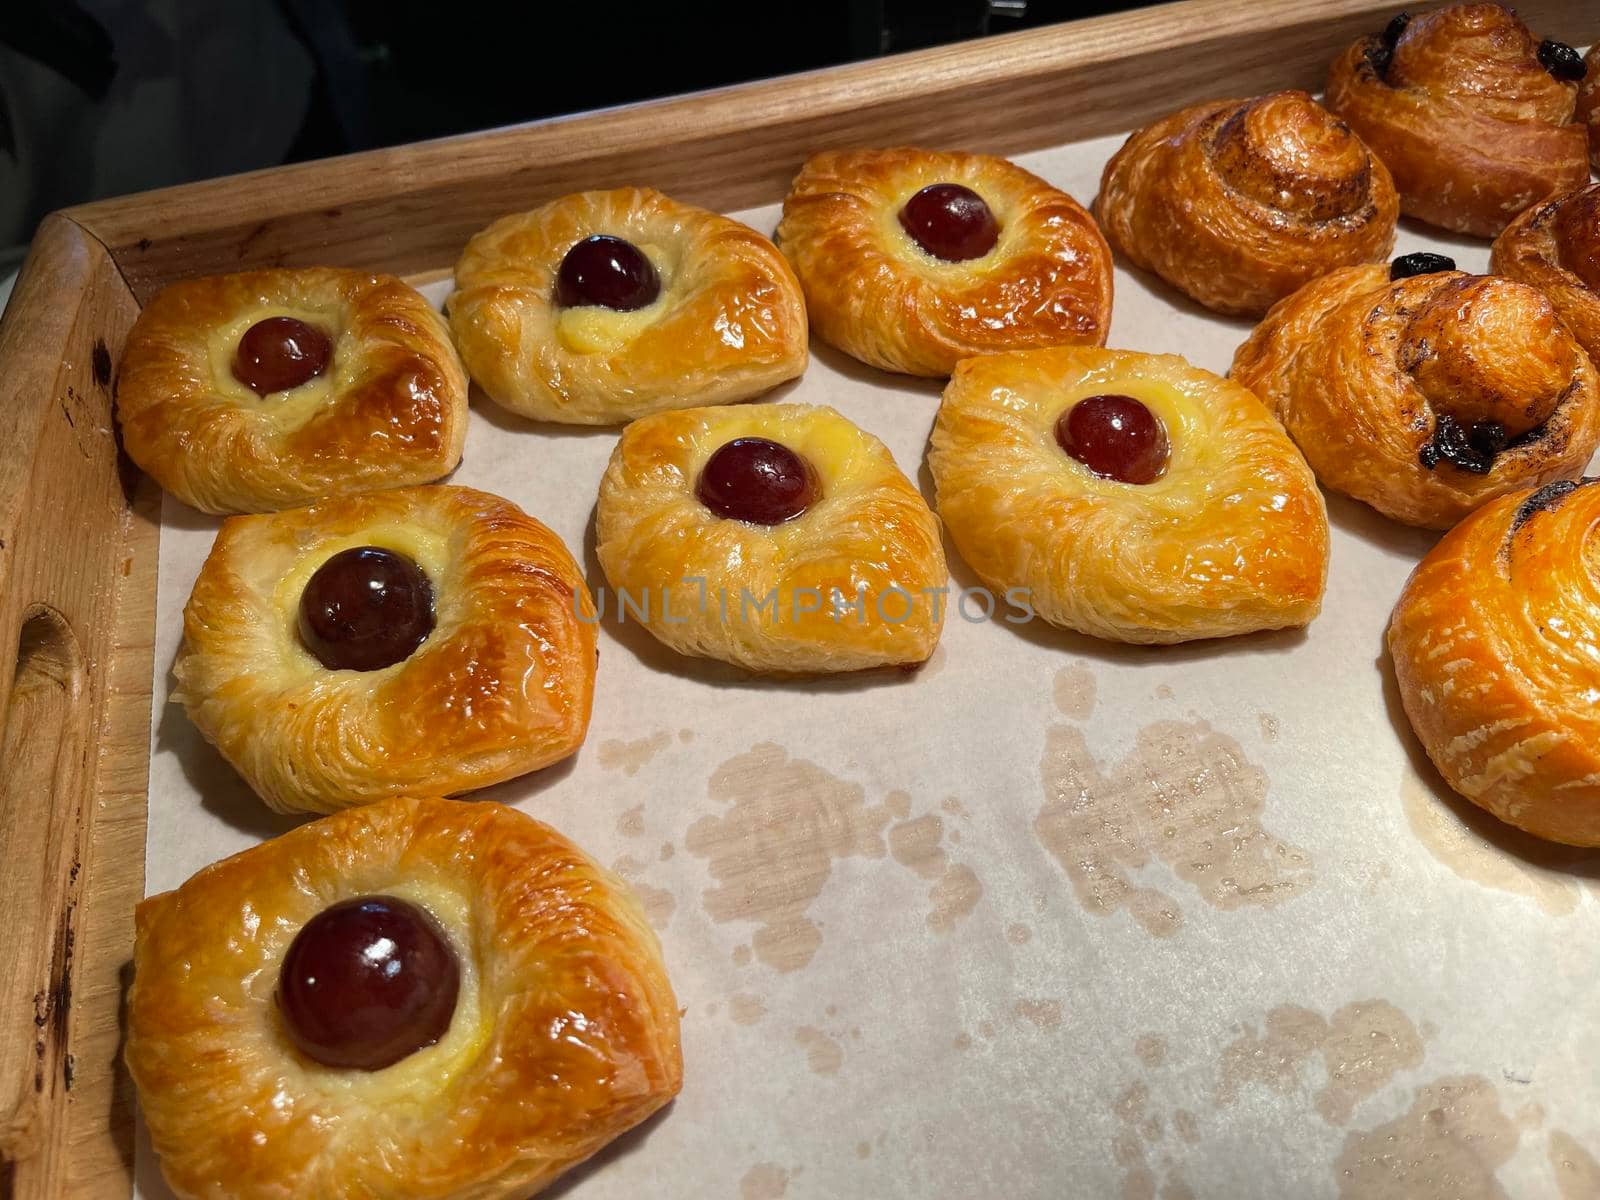 freshly baked danish pastry with apricot jam fruity jelly super delicious warm fresh buttery baked pastries with apricot and peach in bakery kitchen